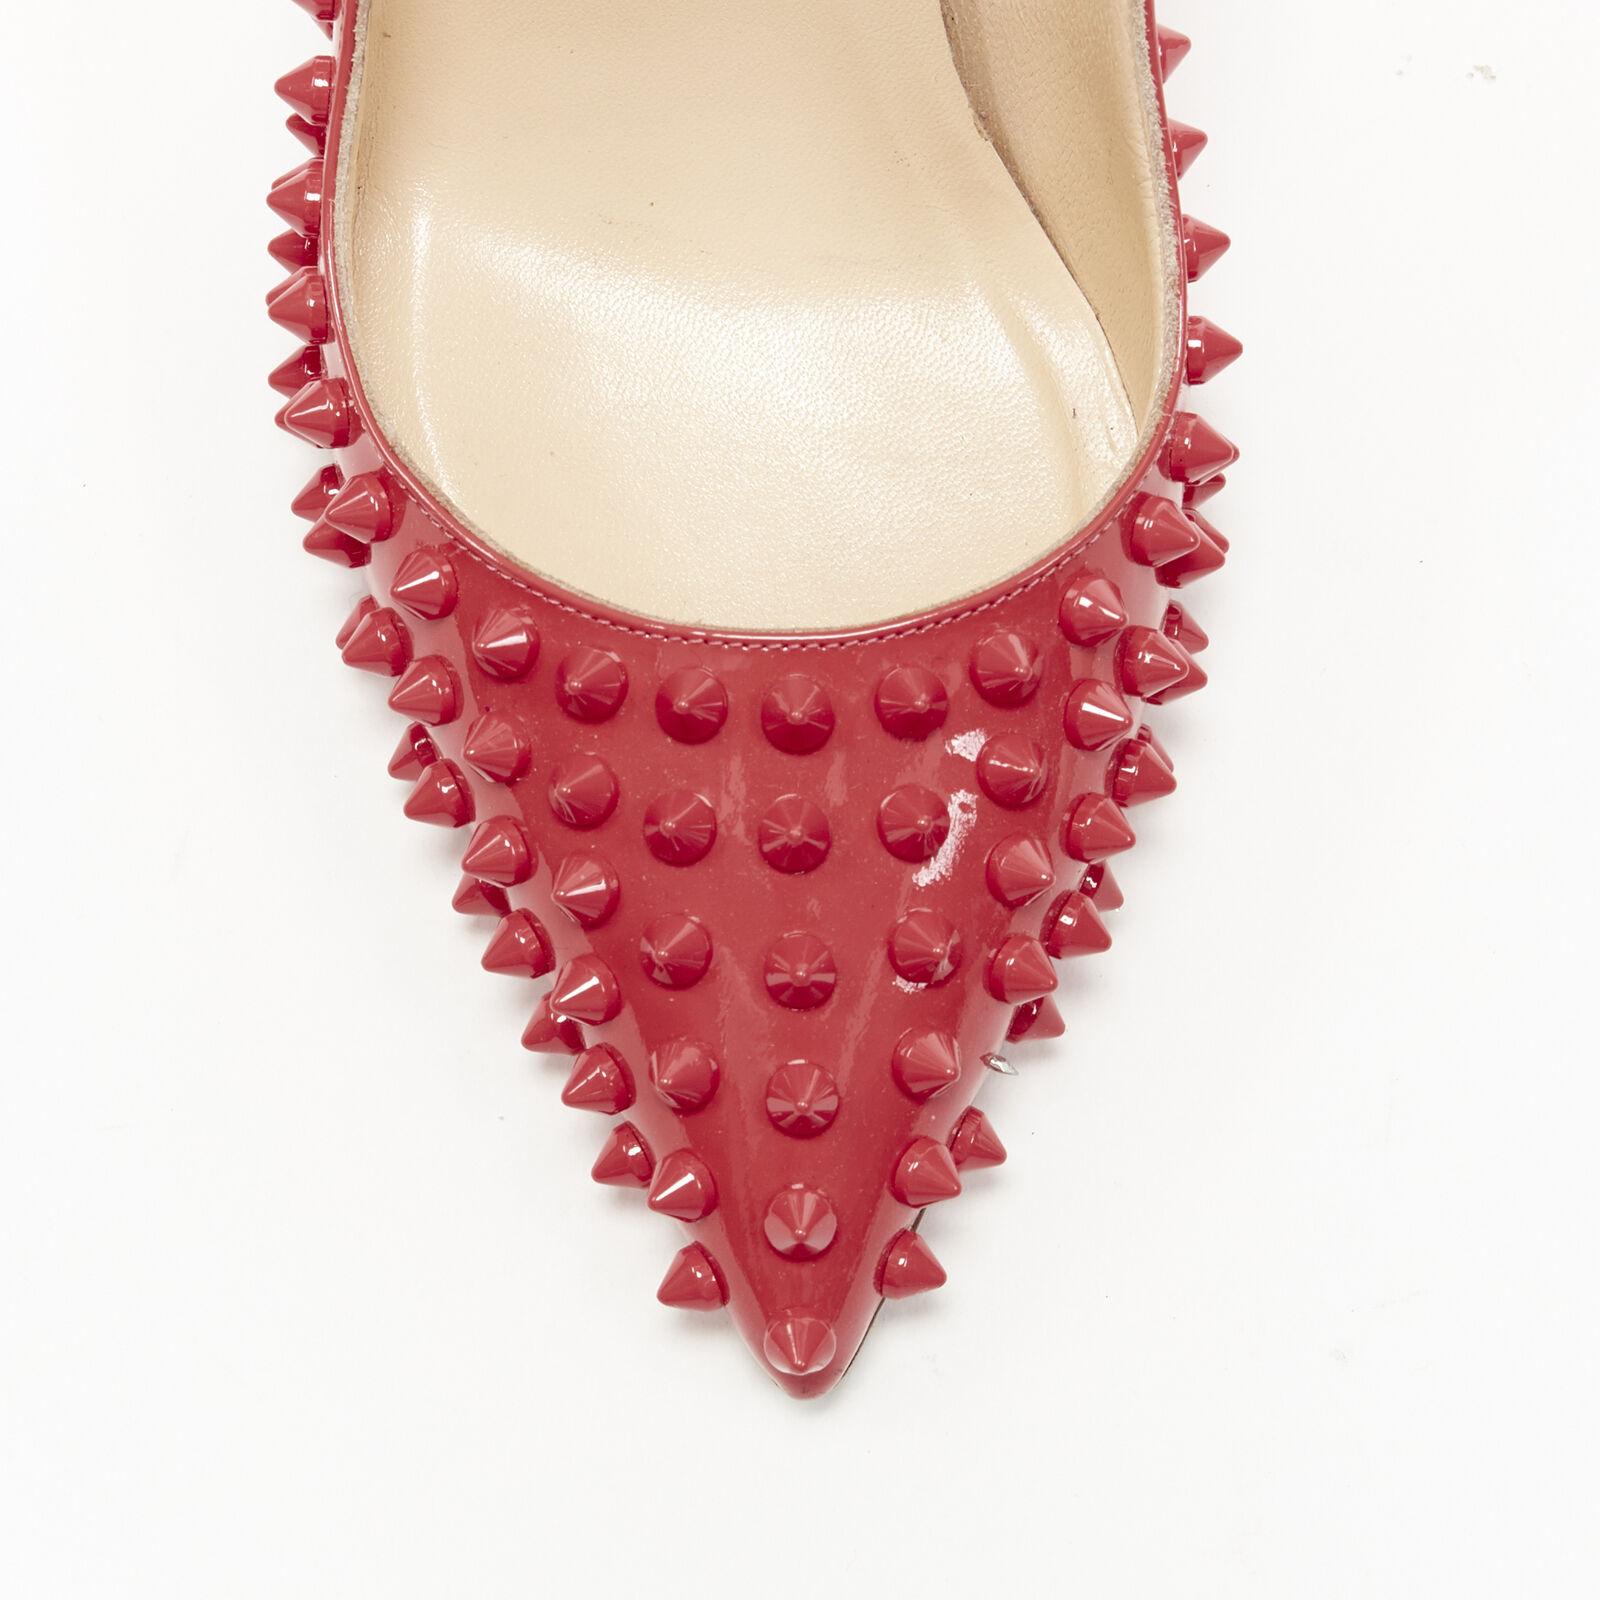 CHRISTIAN LOUBOUTIN pastel pink patent spike allover stud pigalle pump EU39.5 For Sale 2